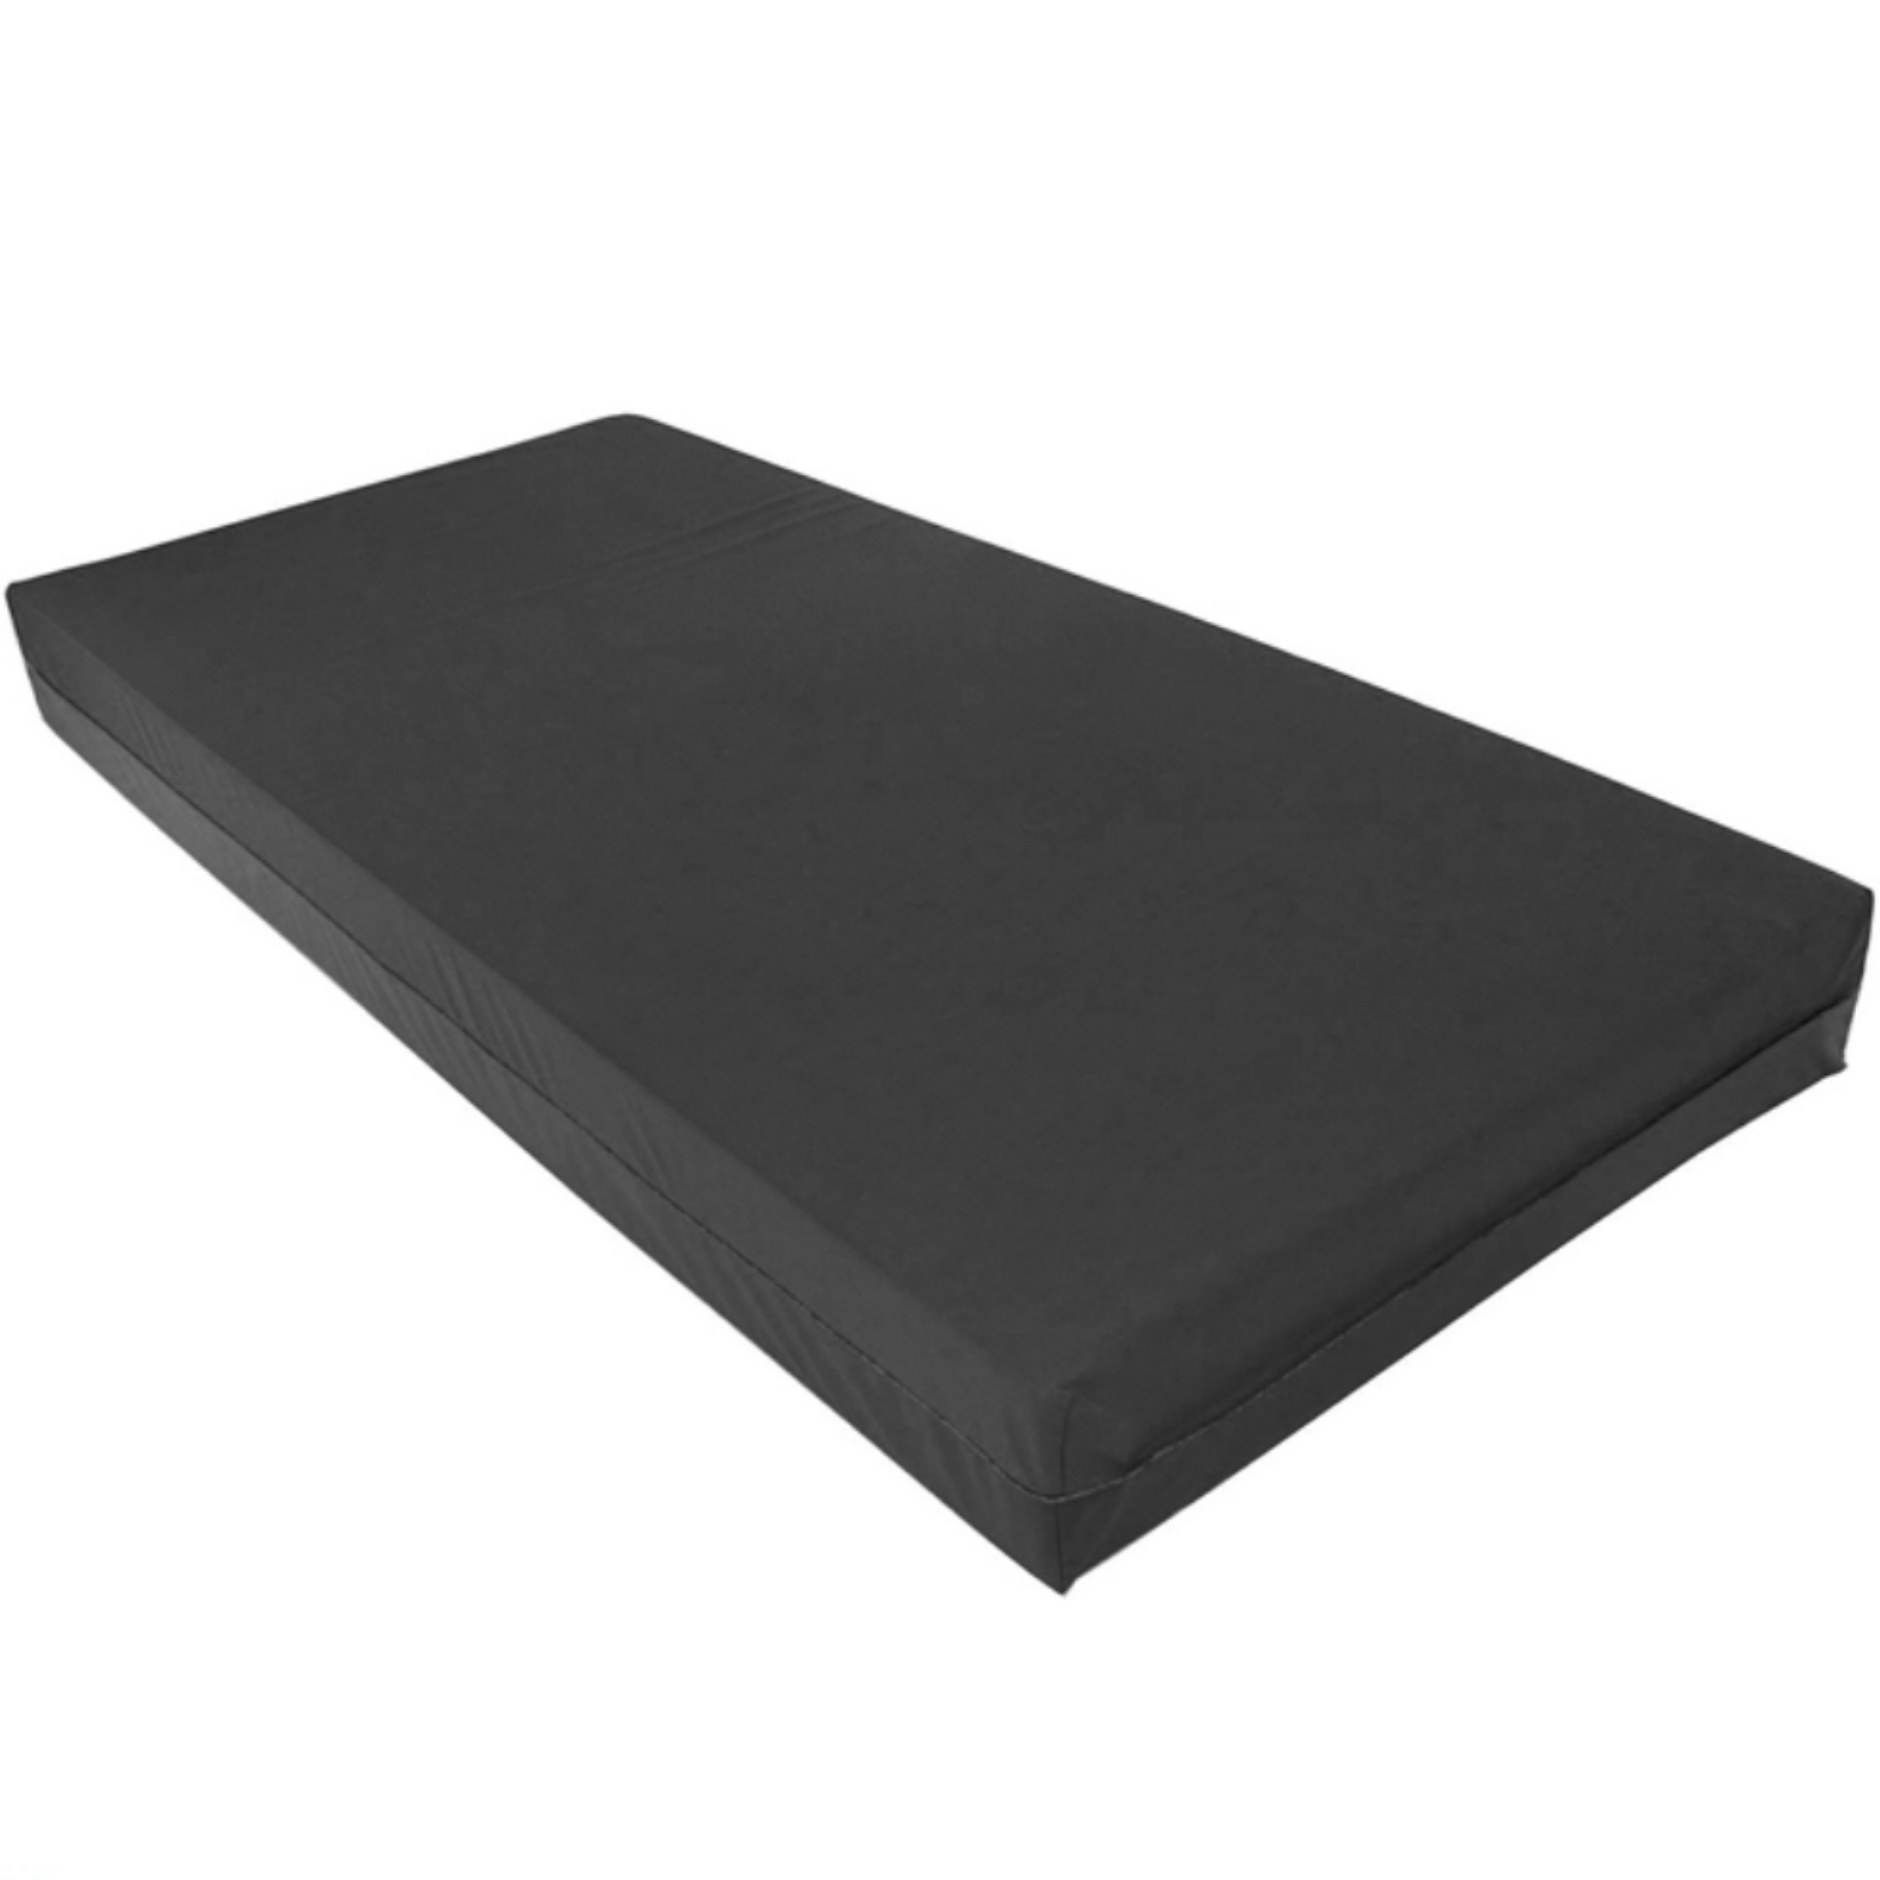 Hospital bed mattress types | Purchase at cheap price